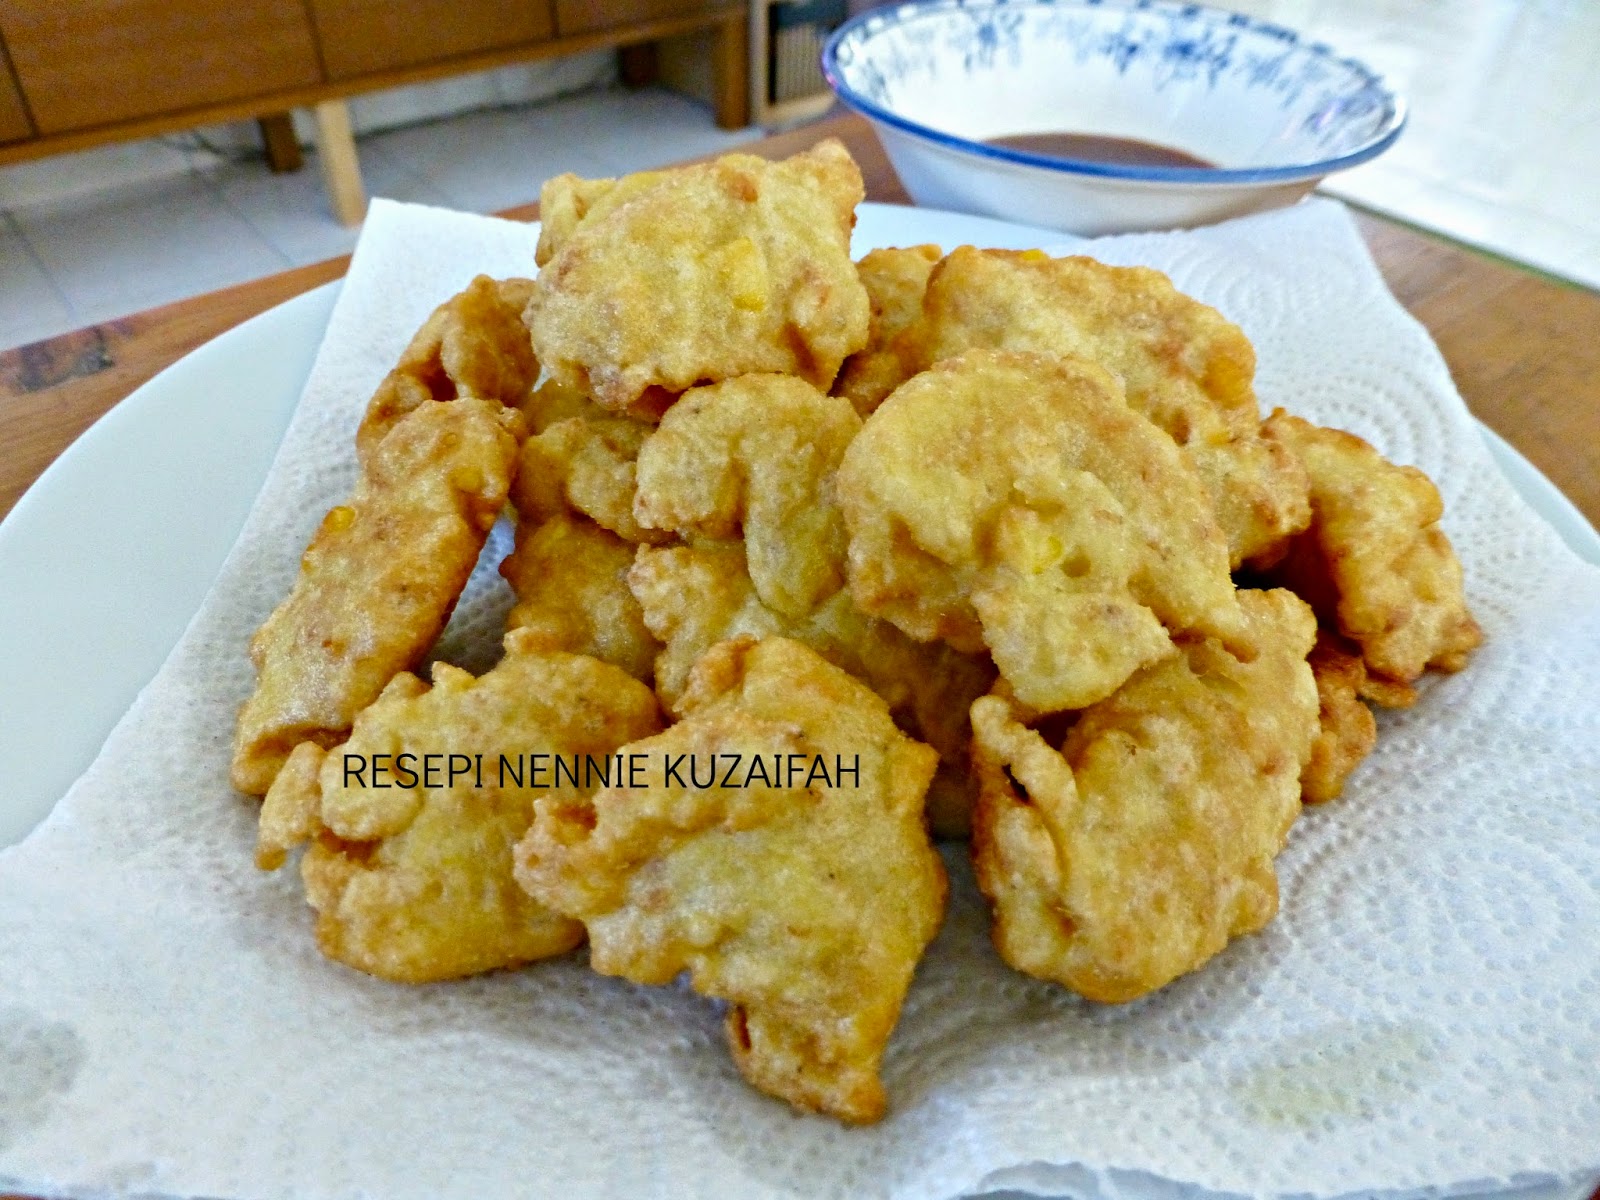 Resepi Sos Cili Cucur Udang - Waaiting for Someone